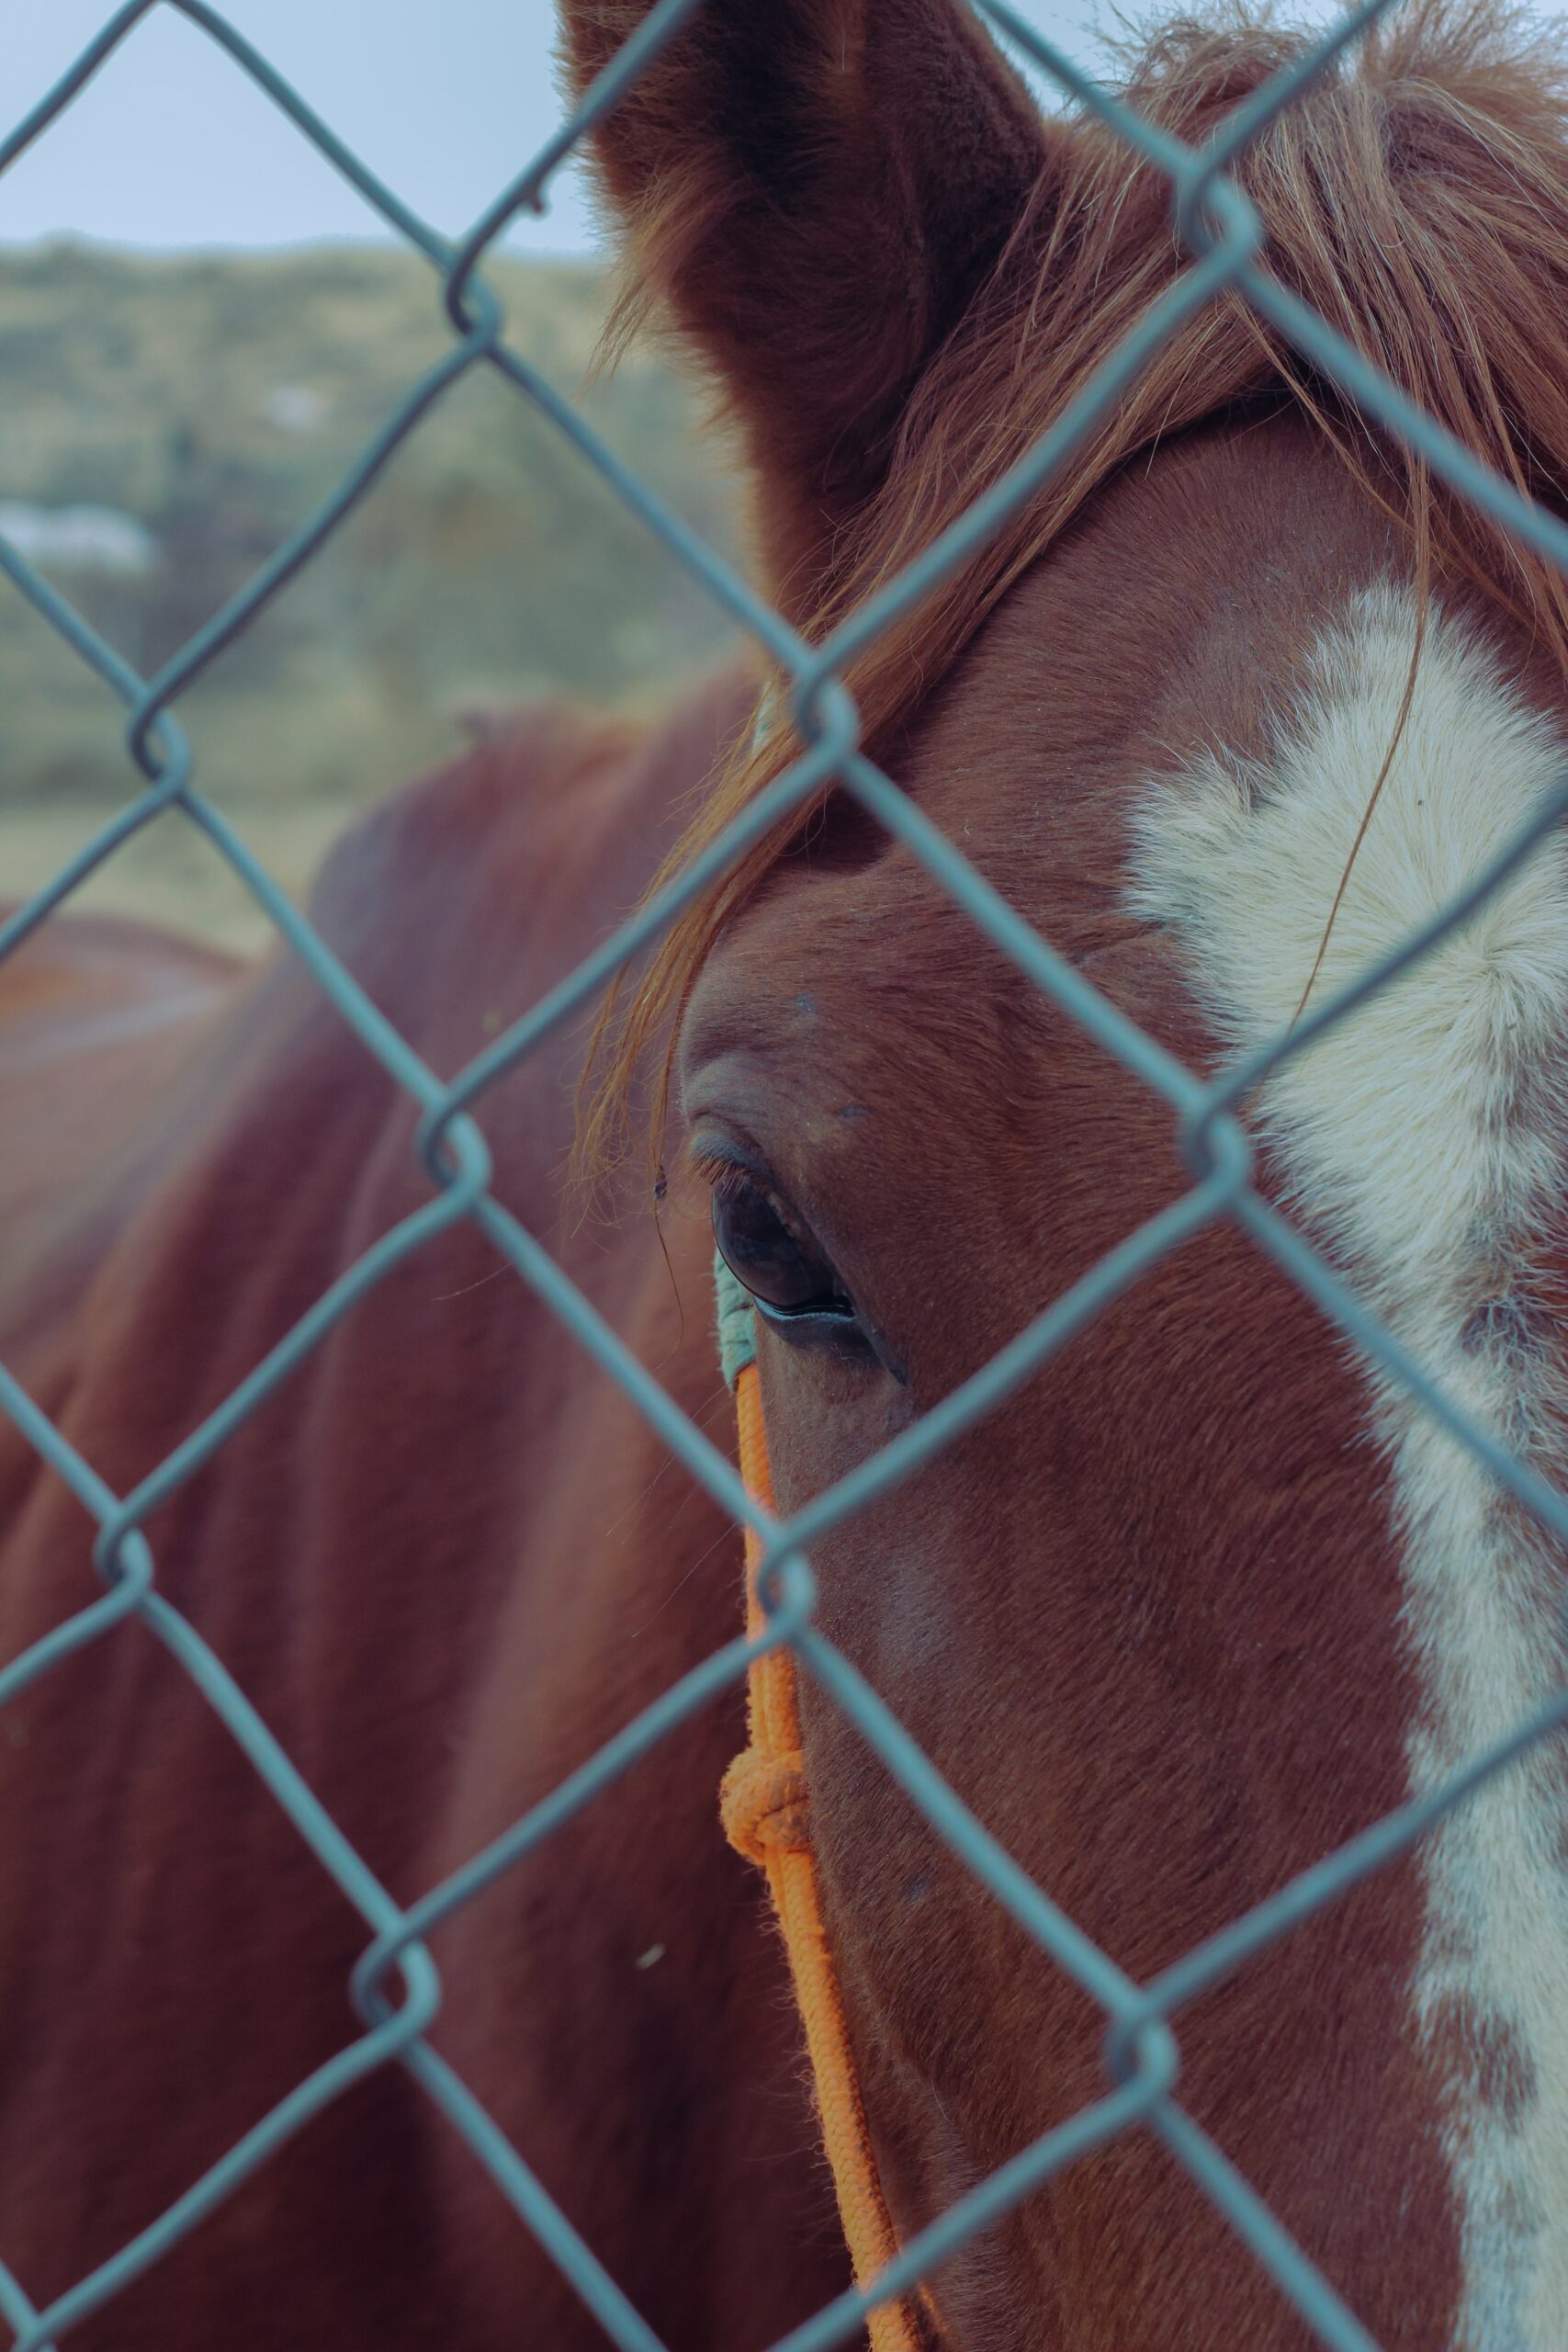 Do Horses Remember Traumatic Experiences?